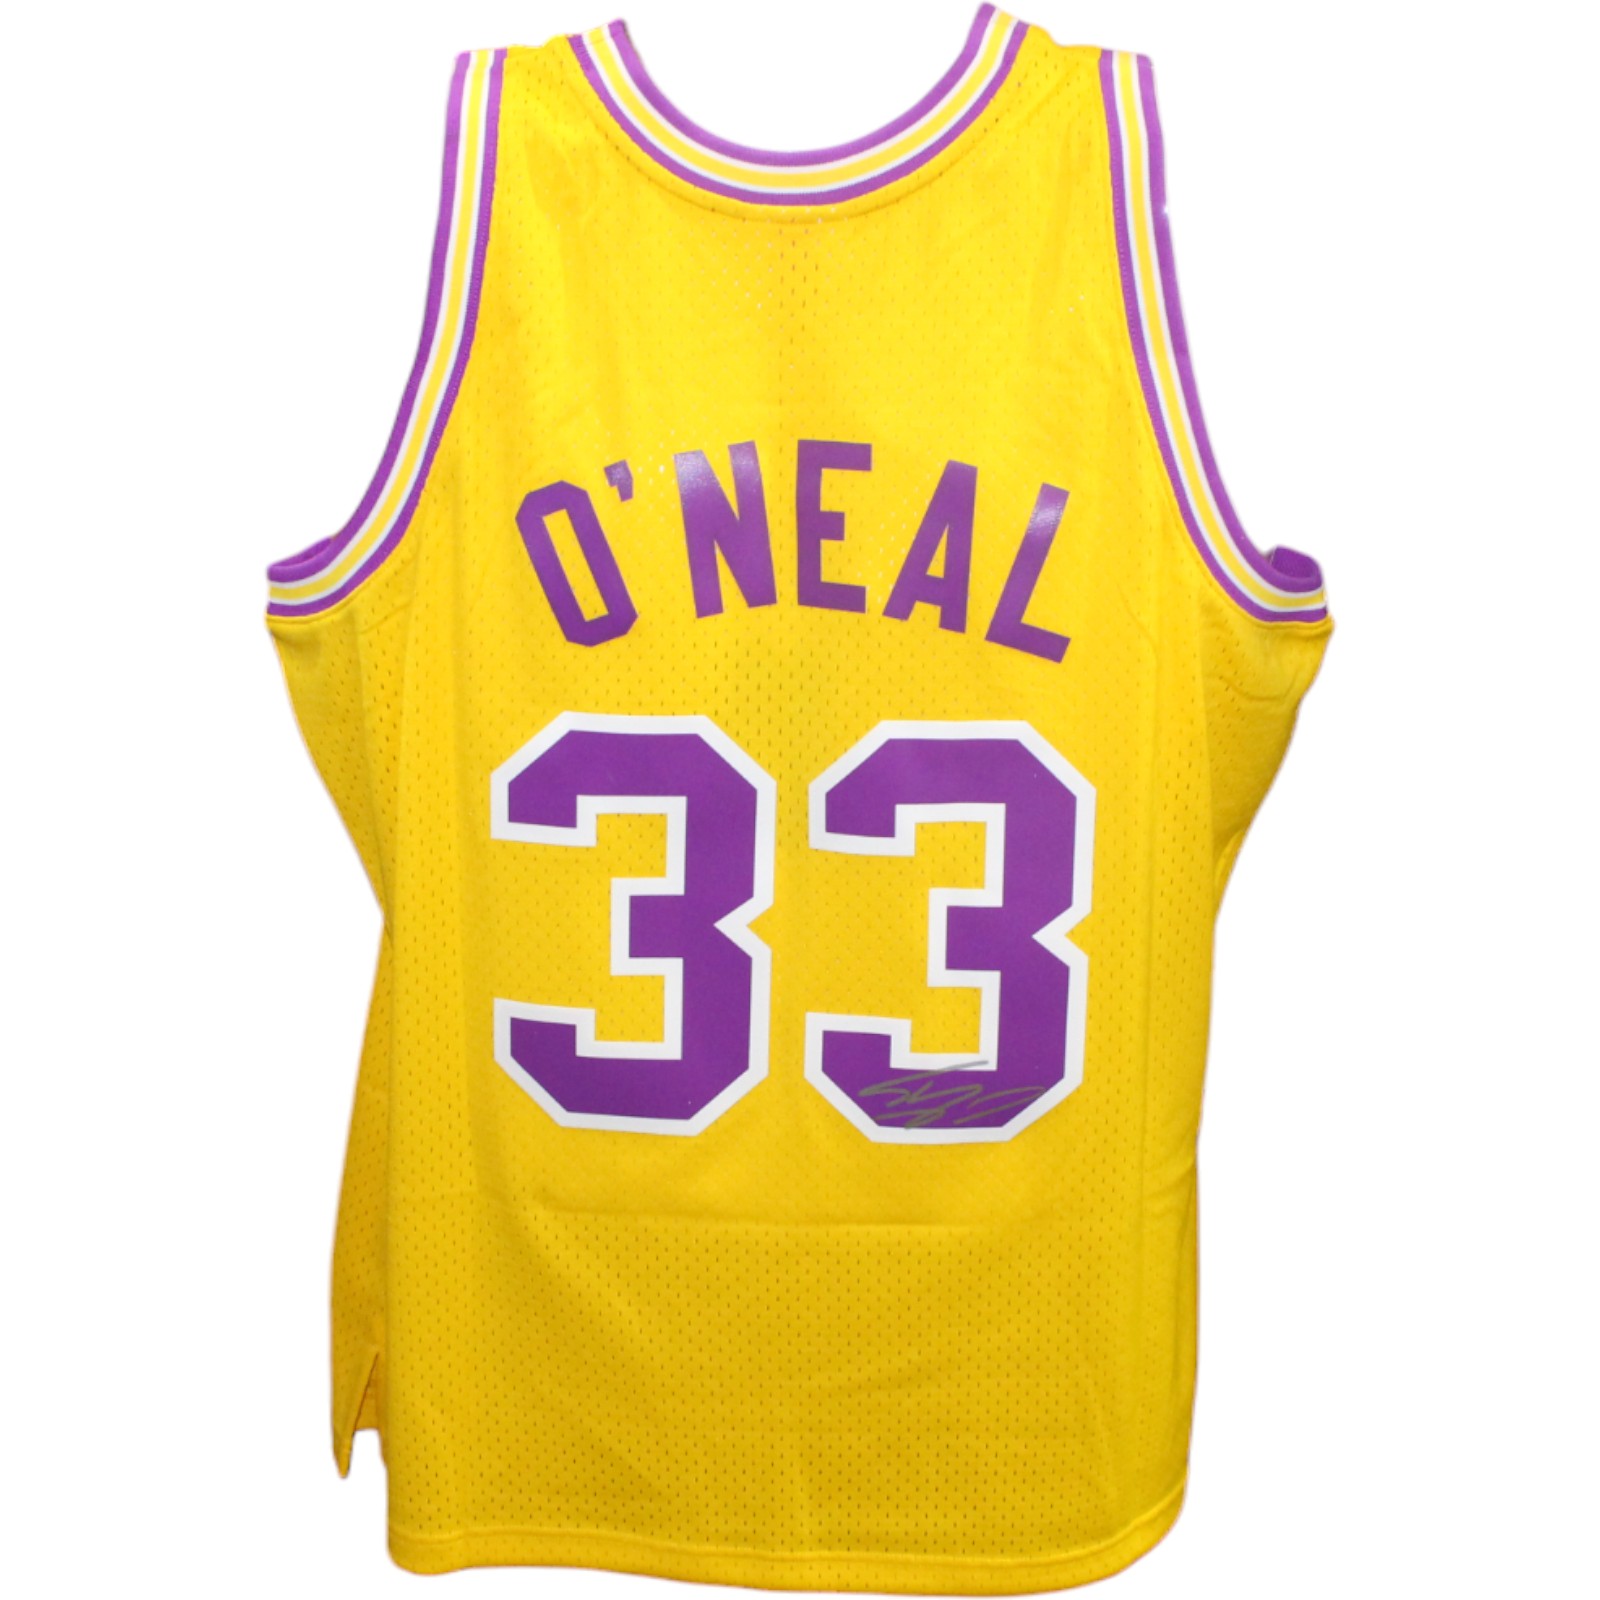 Shaq O'neal Autographed/Signed LSU Tigers M&N Jersey Beckett